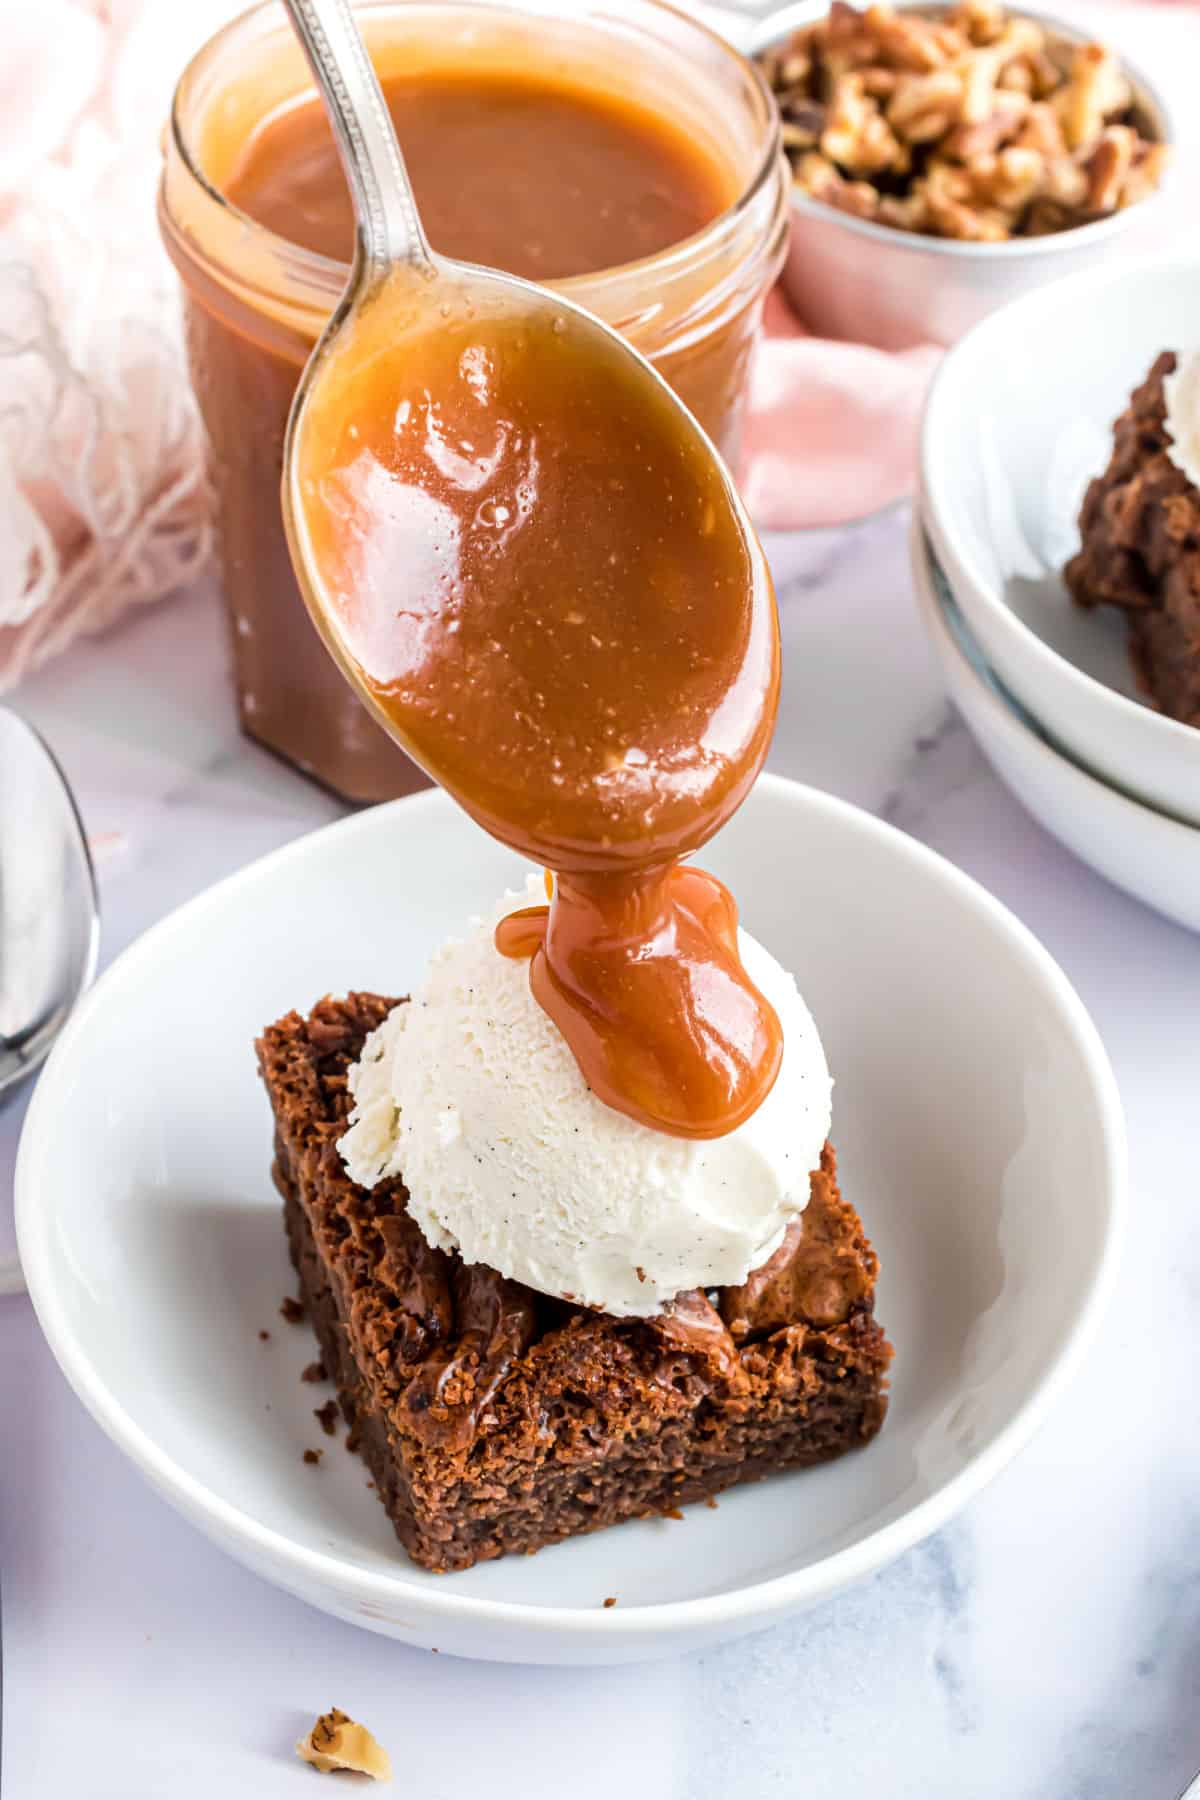 Caramel sauce being drizzled over ice cream and brownies.